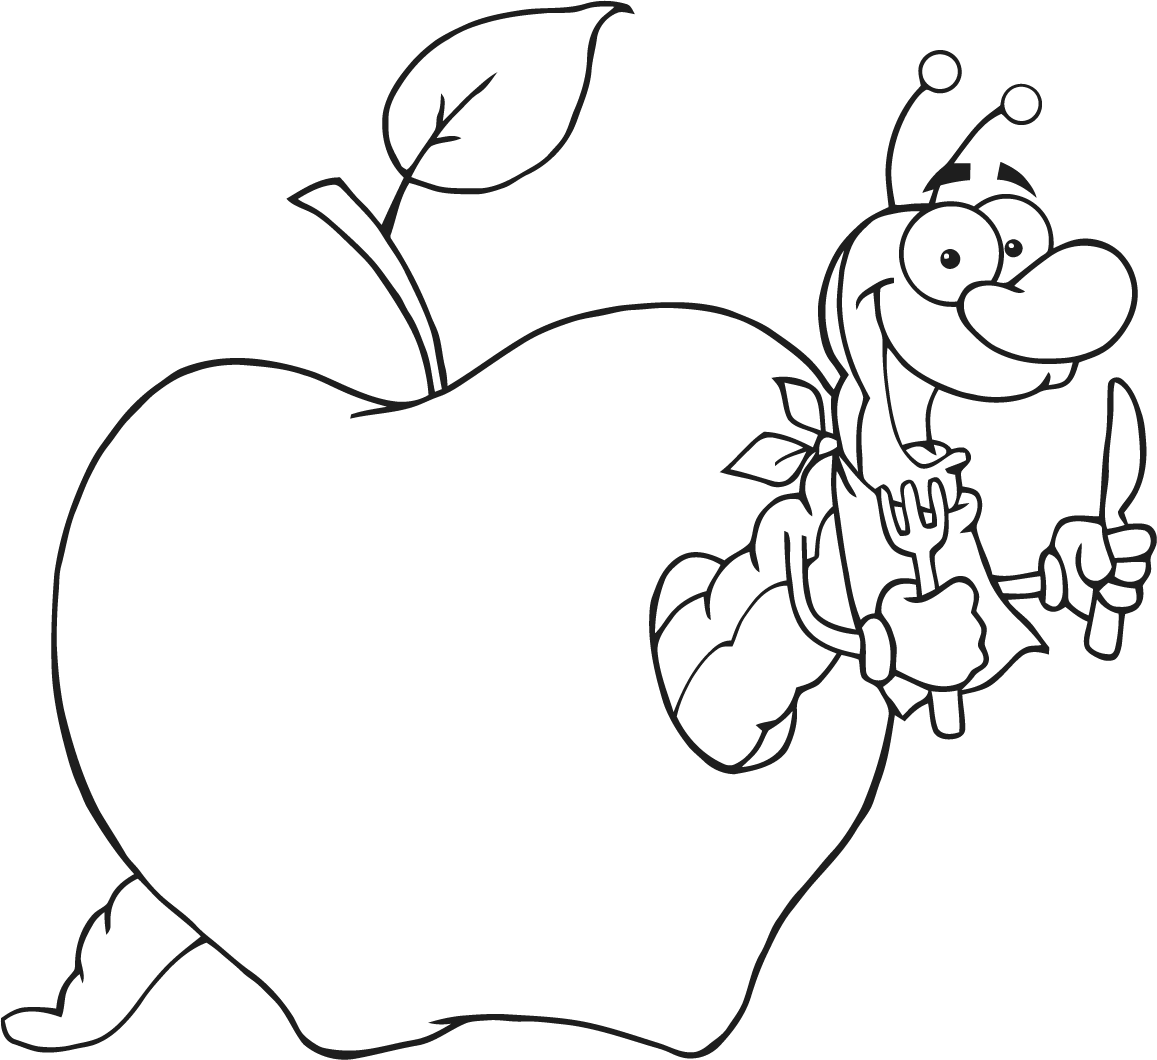 Free Printable Coloring Page Apple Picking - ClipArt Best